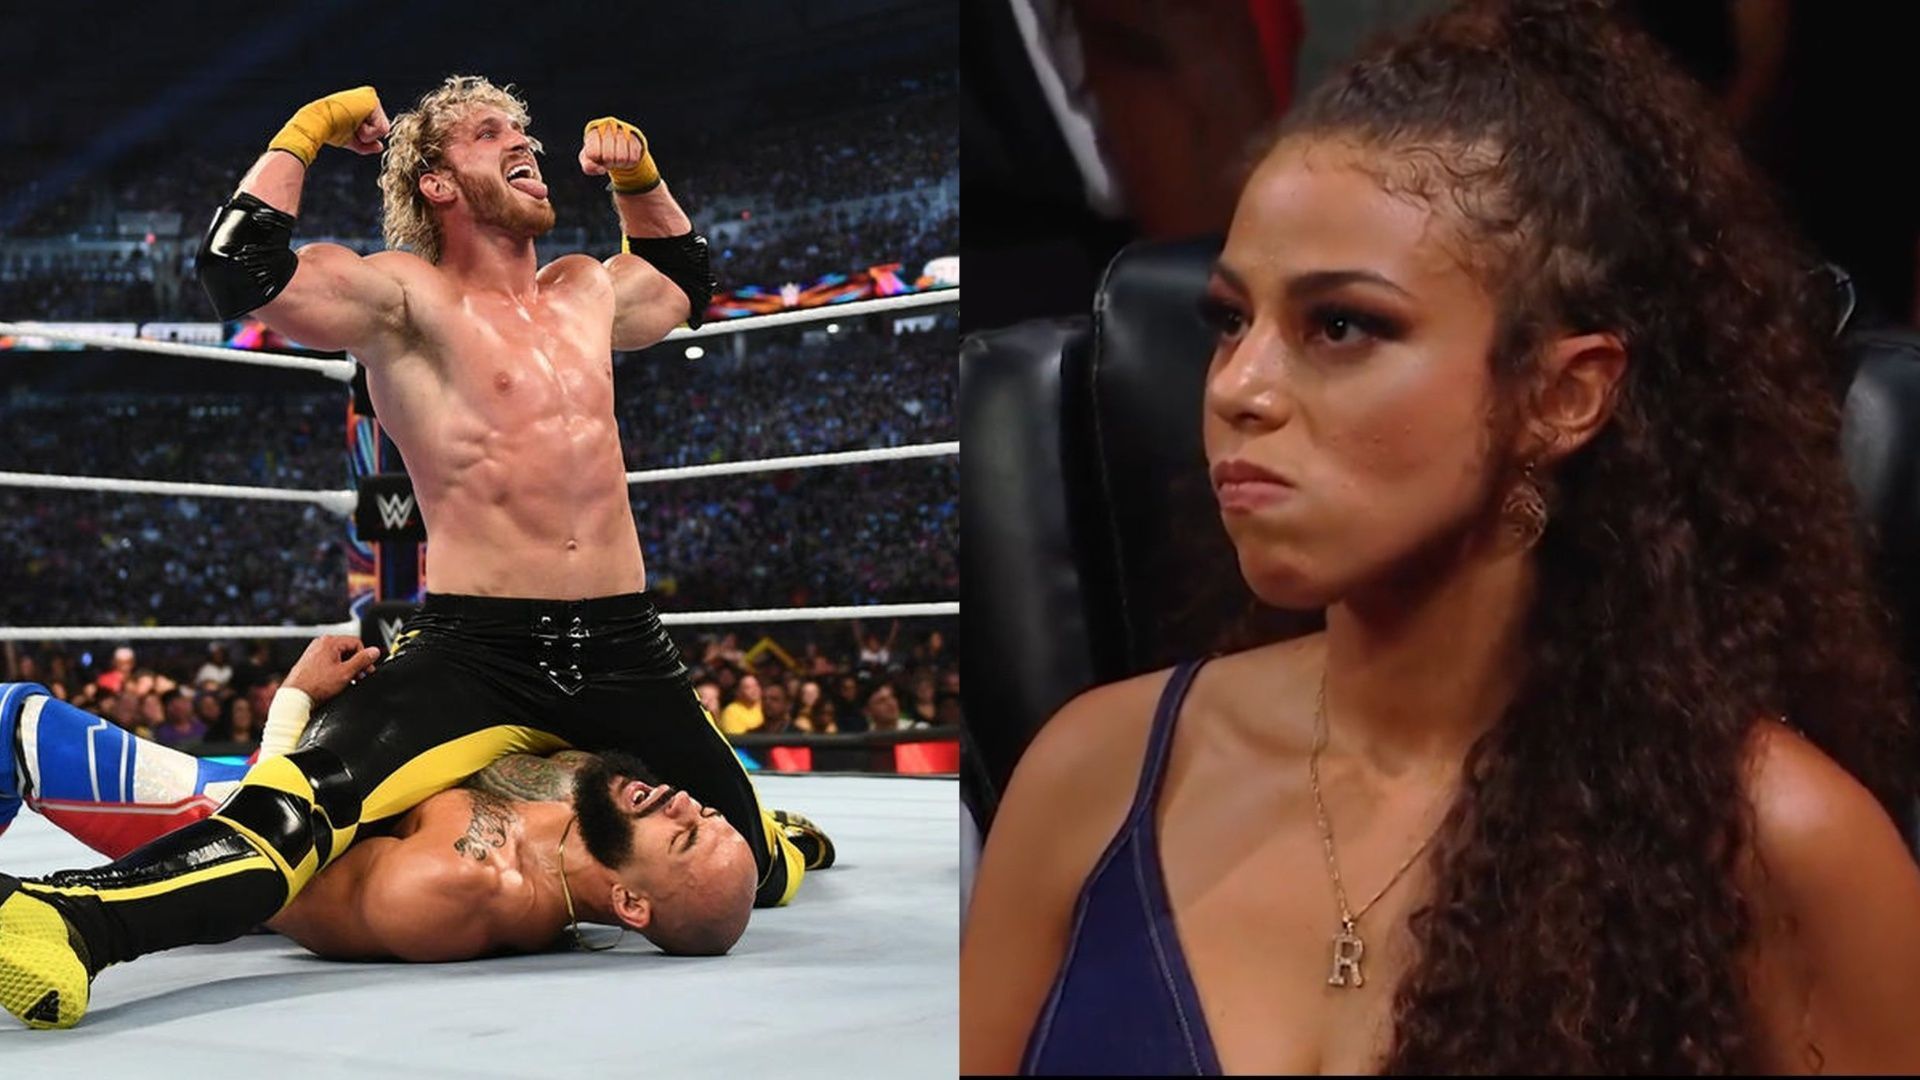 Samantha Irvin not pleased with Logan Paul during his feud with Ricochet.